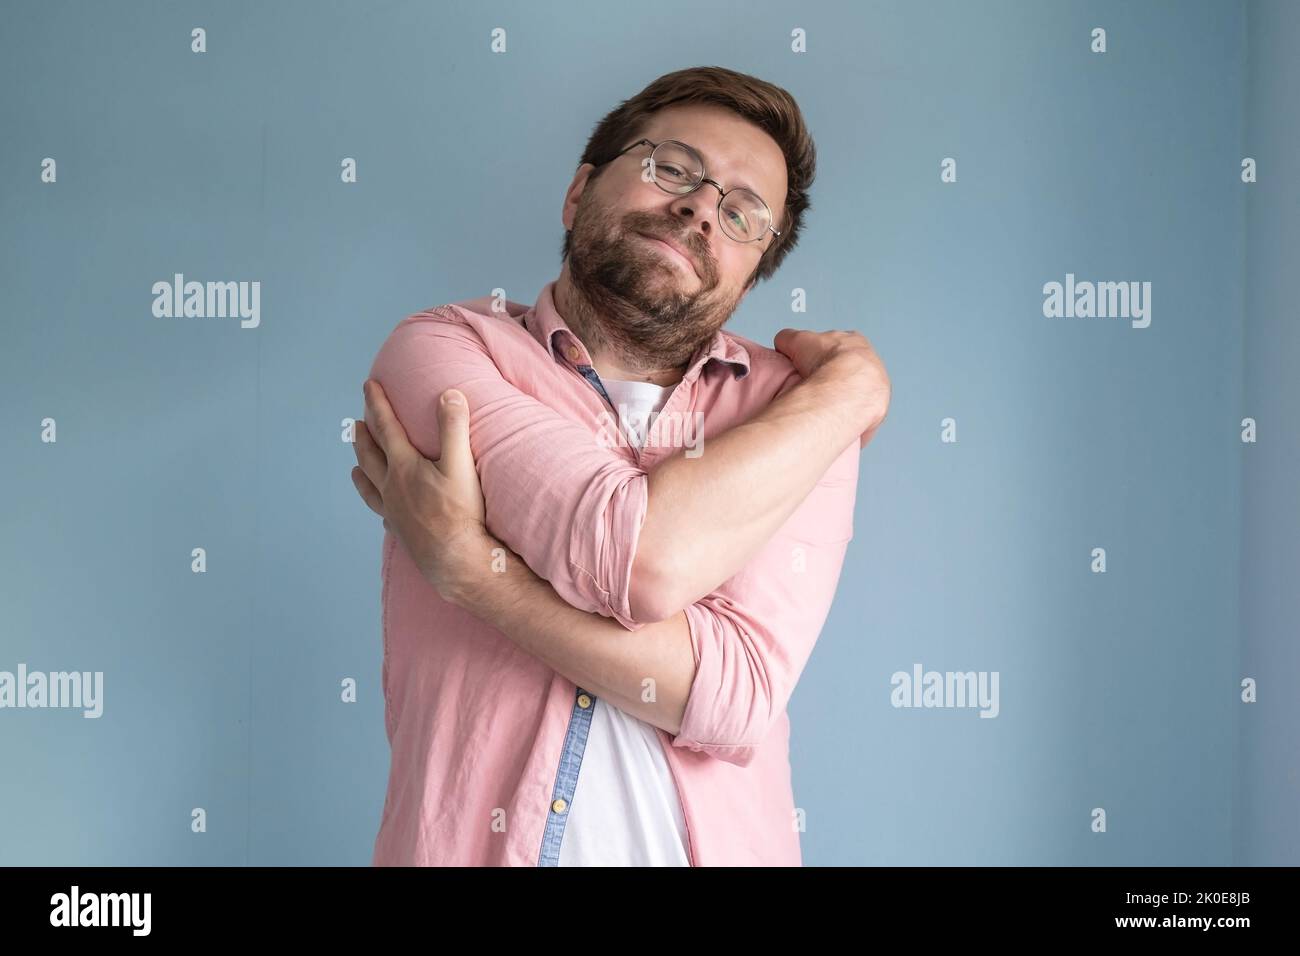 Dreaming about love, a man in glasses and a shirt gently hugs himself, standing on a blue background. Stock Photo